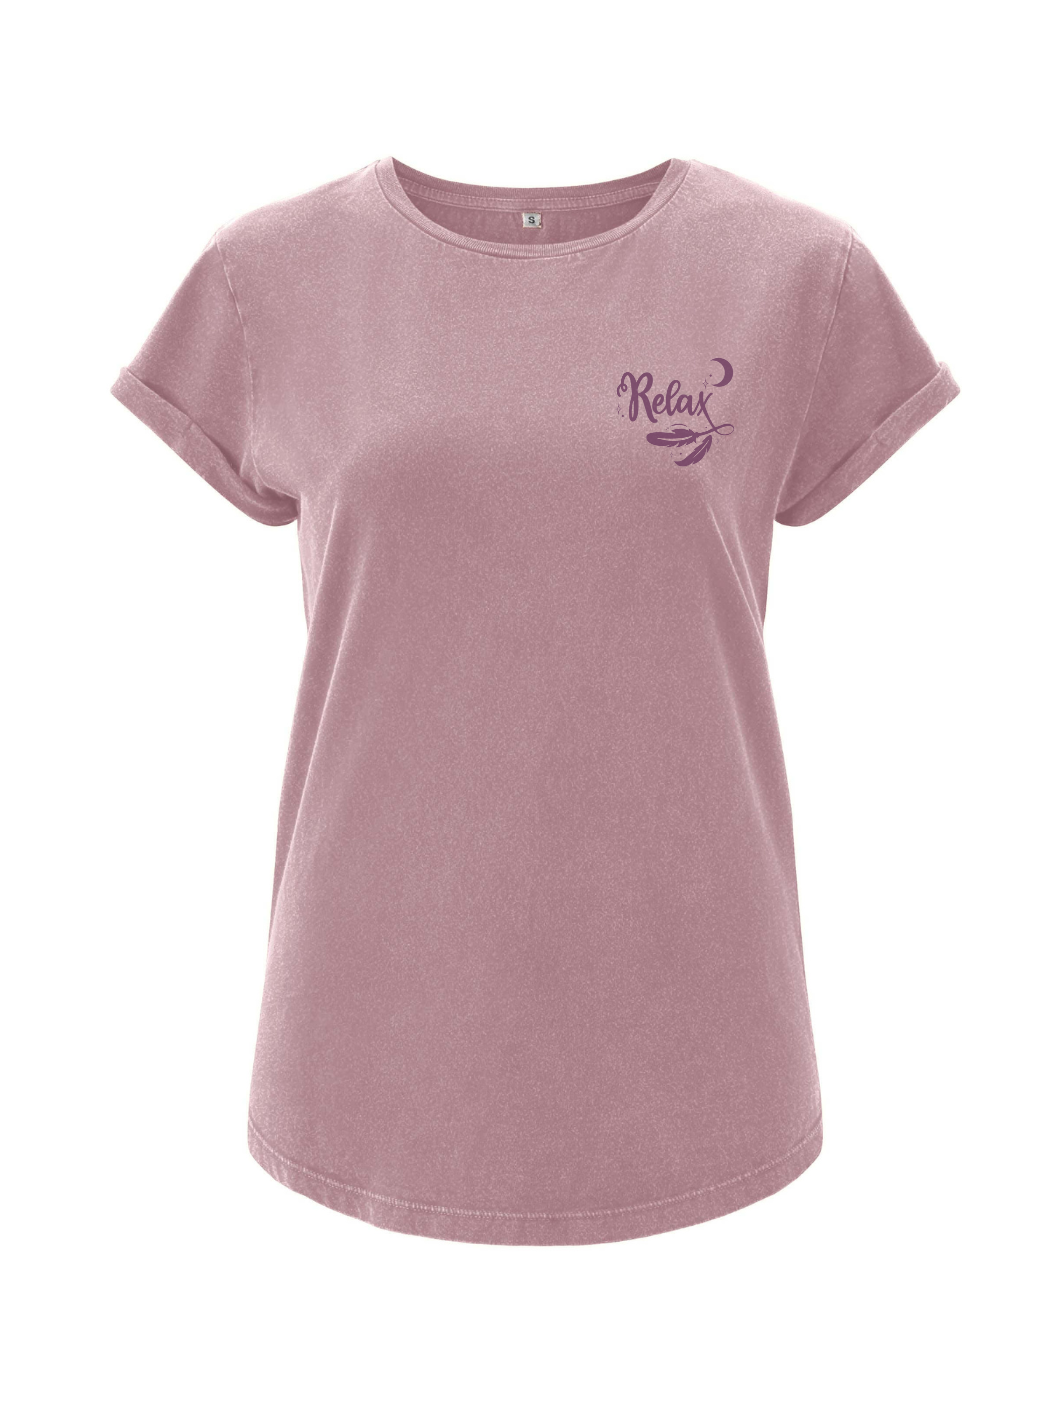 Relax Damen T-Shirt rolled arms purple rose